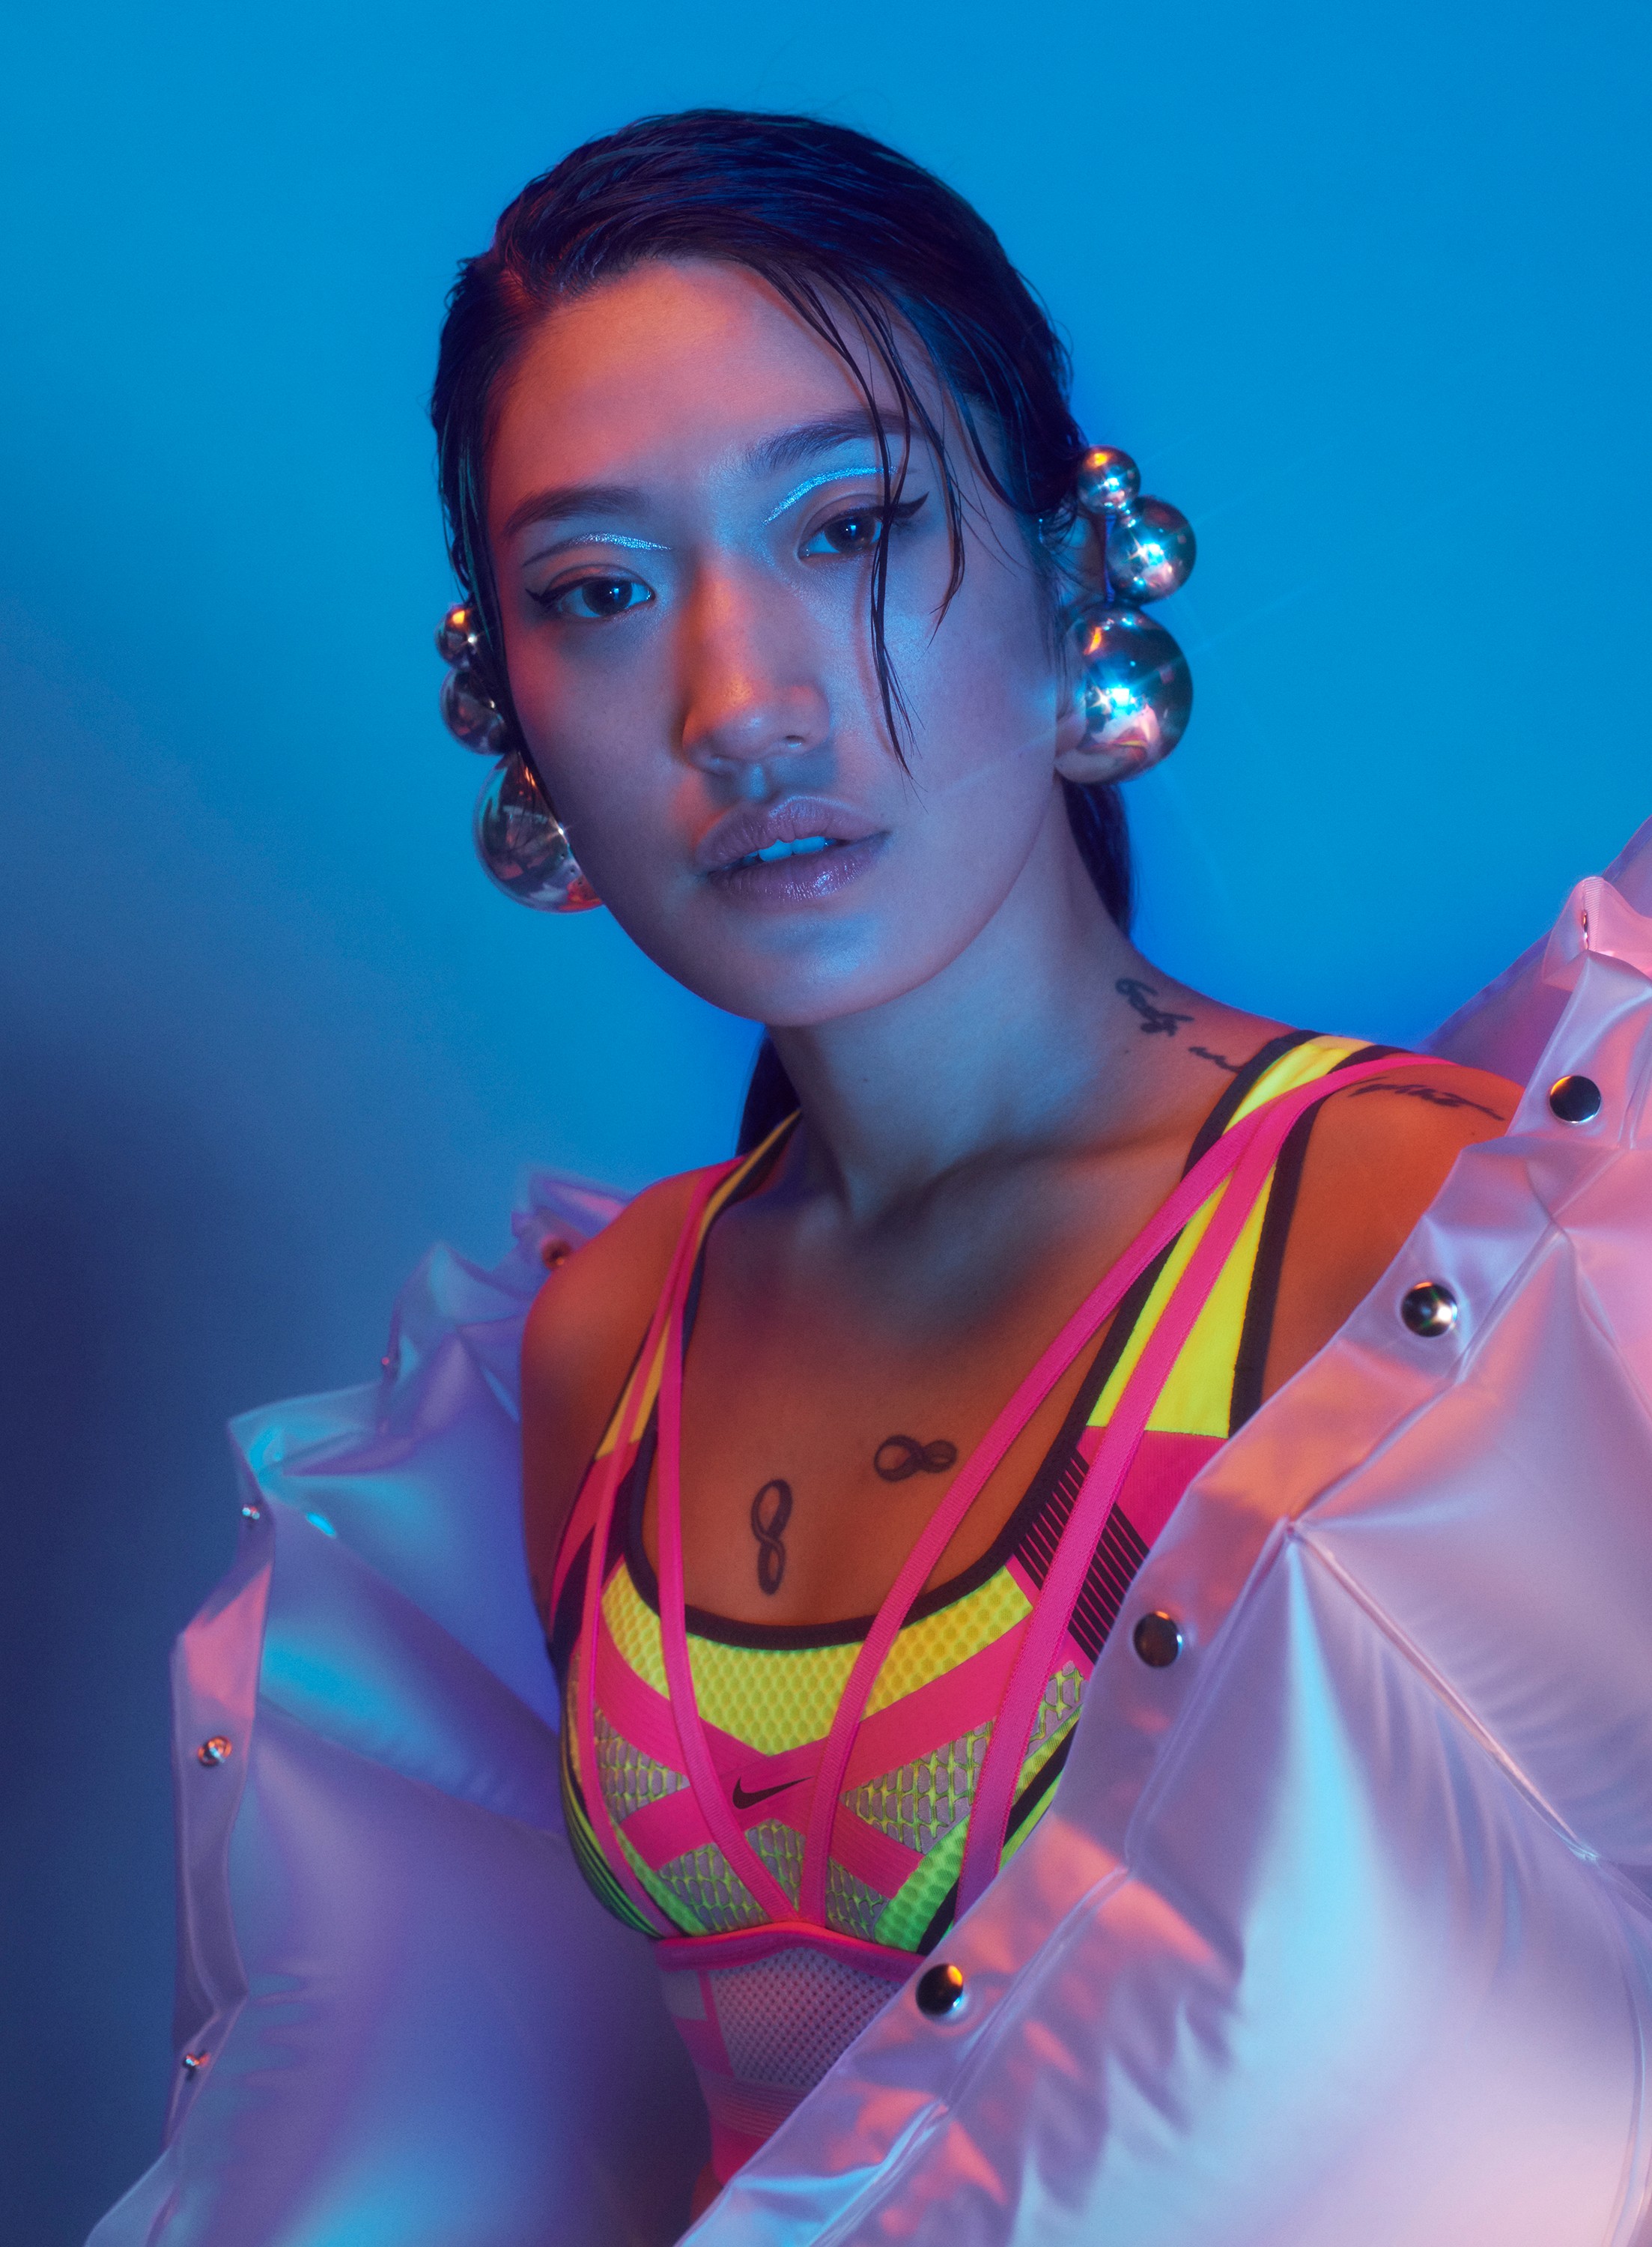 Peggy Gou Takes Us on a Fashionable Stroll Through Berlin for Louis Vuitton  – TITLE MAG